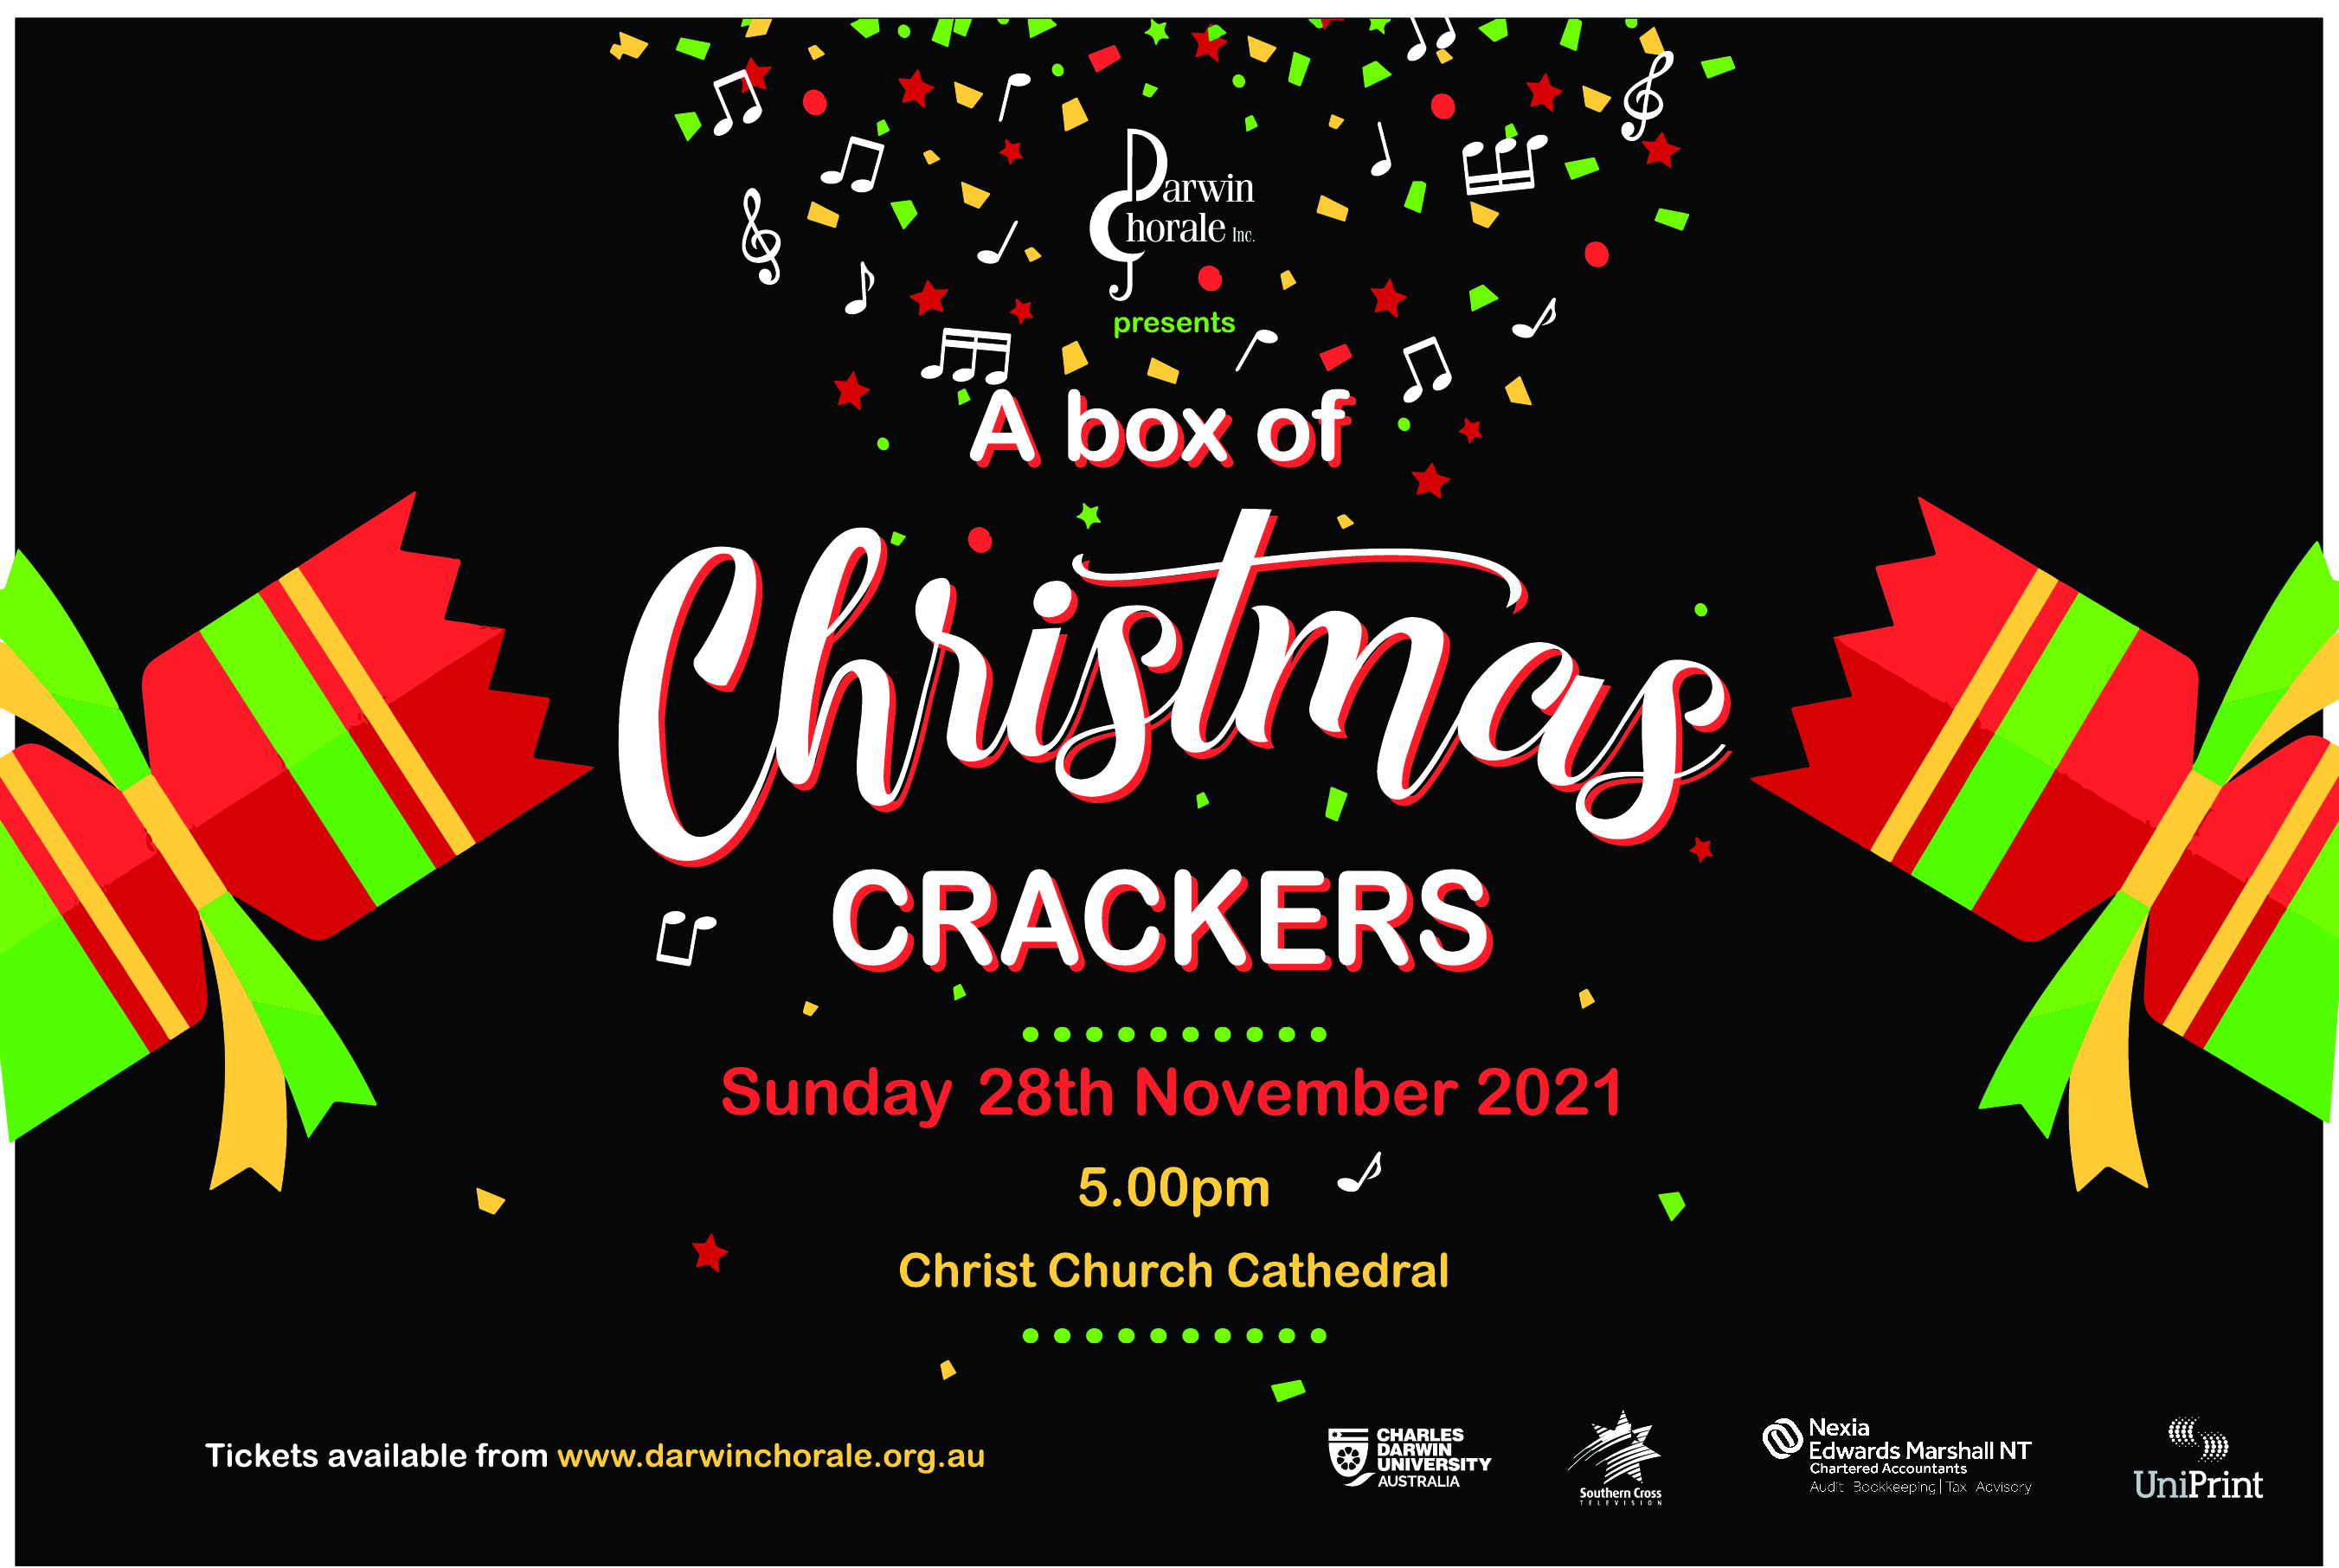 A Box of Christmas Crackers